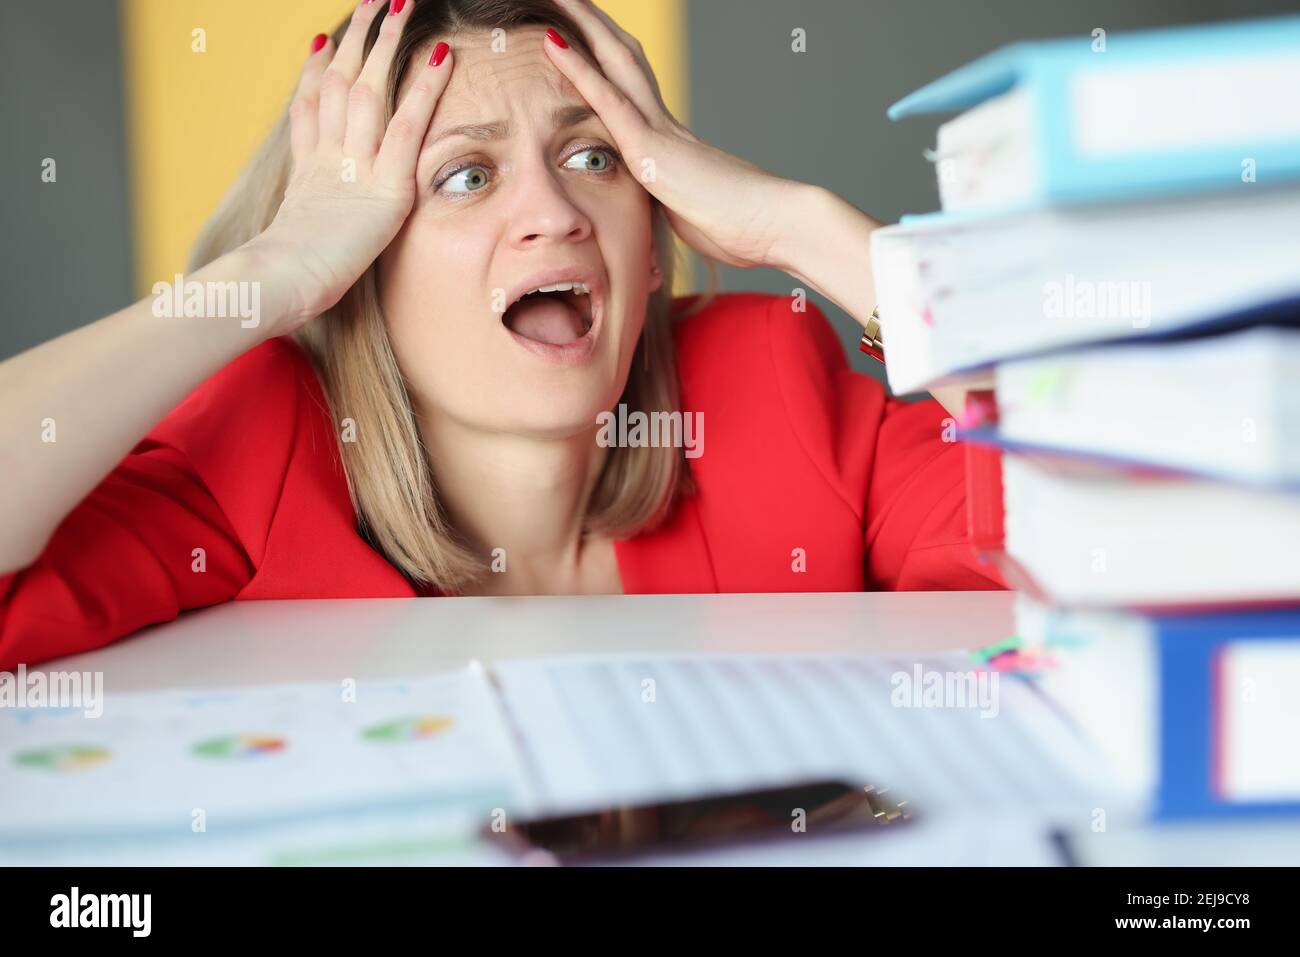 Woman holding her head and is surprised in front of many folders on table Stock Photo